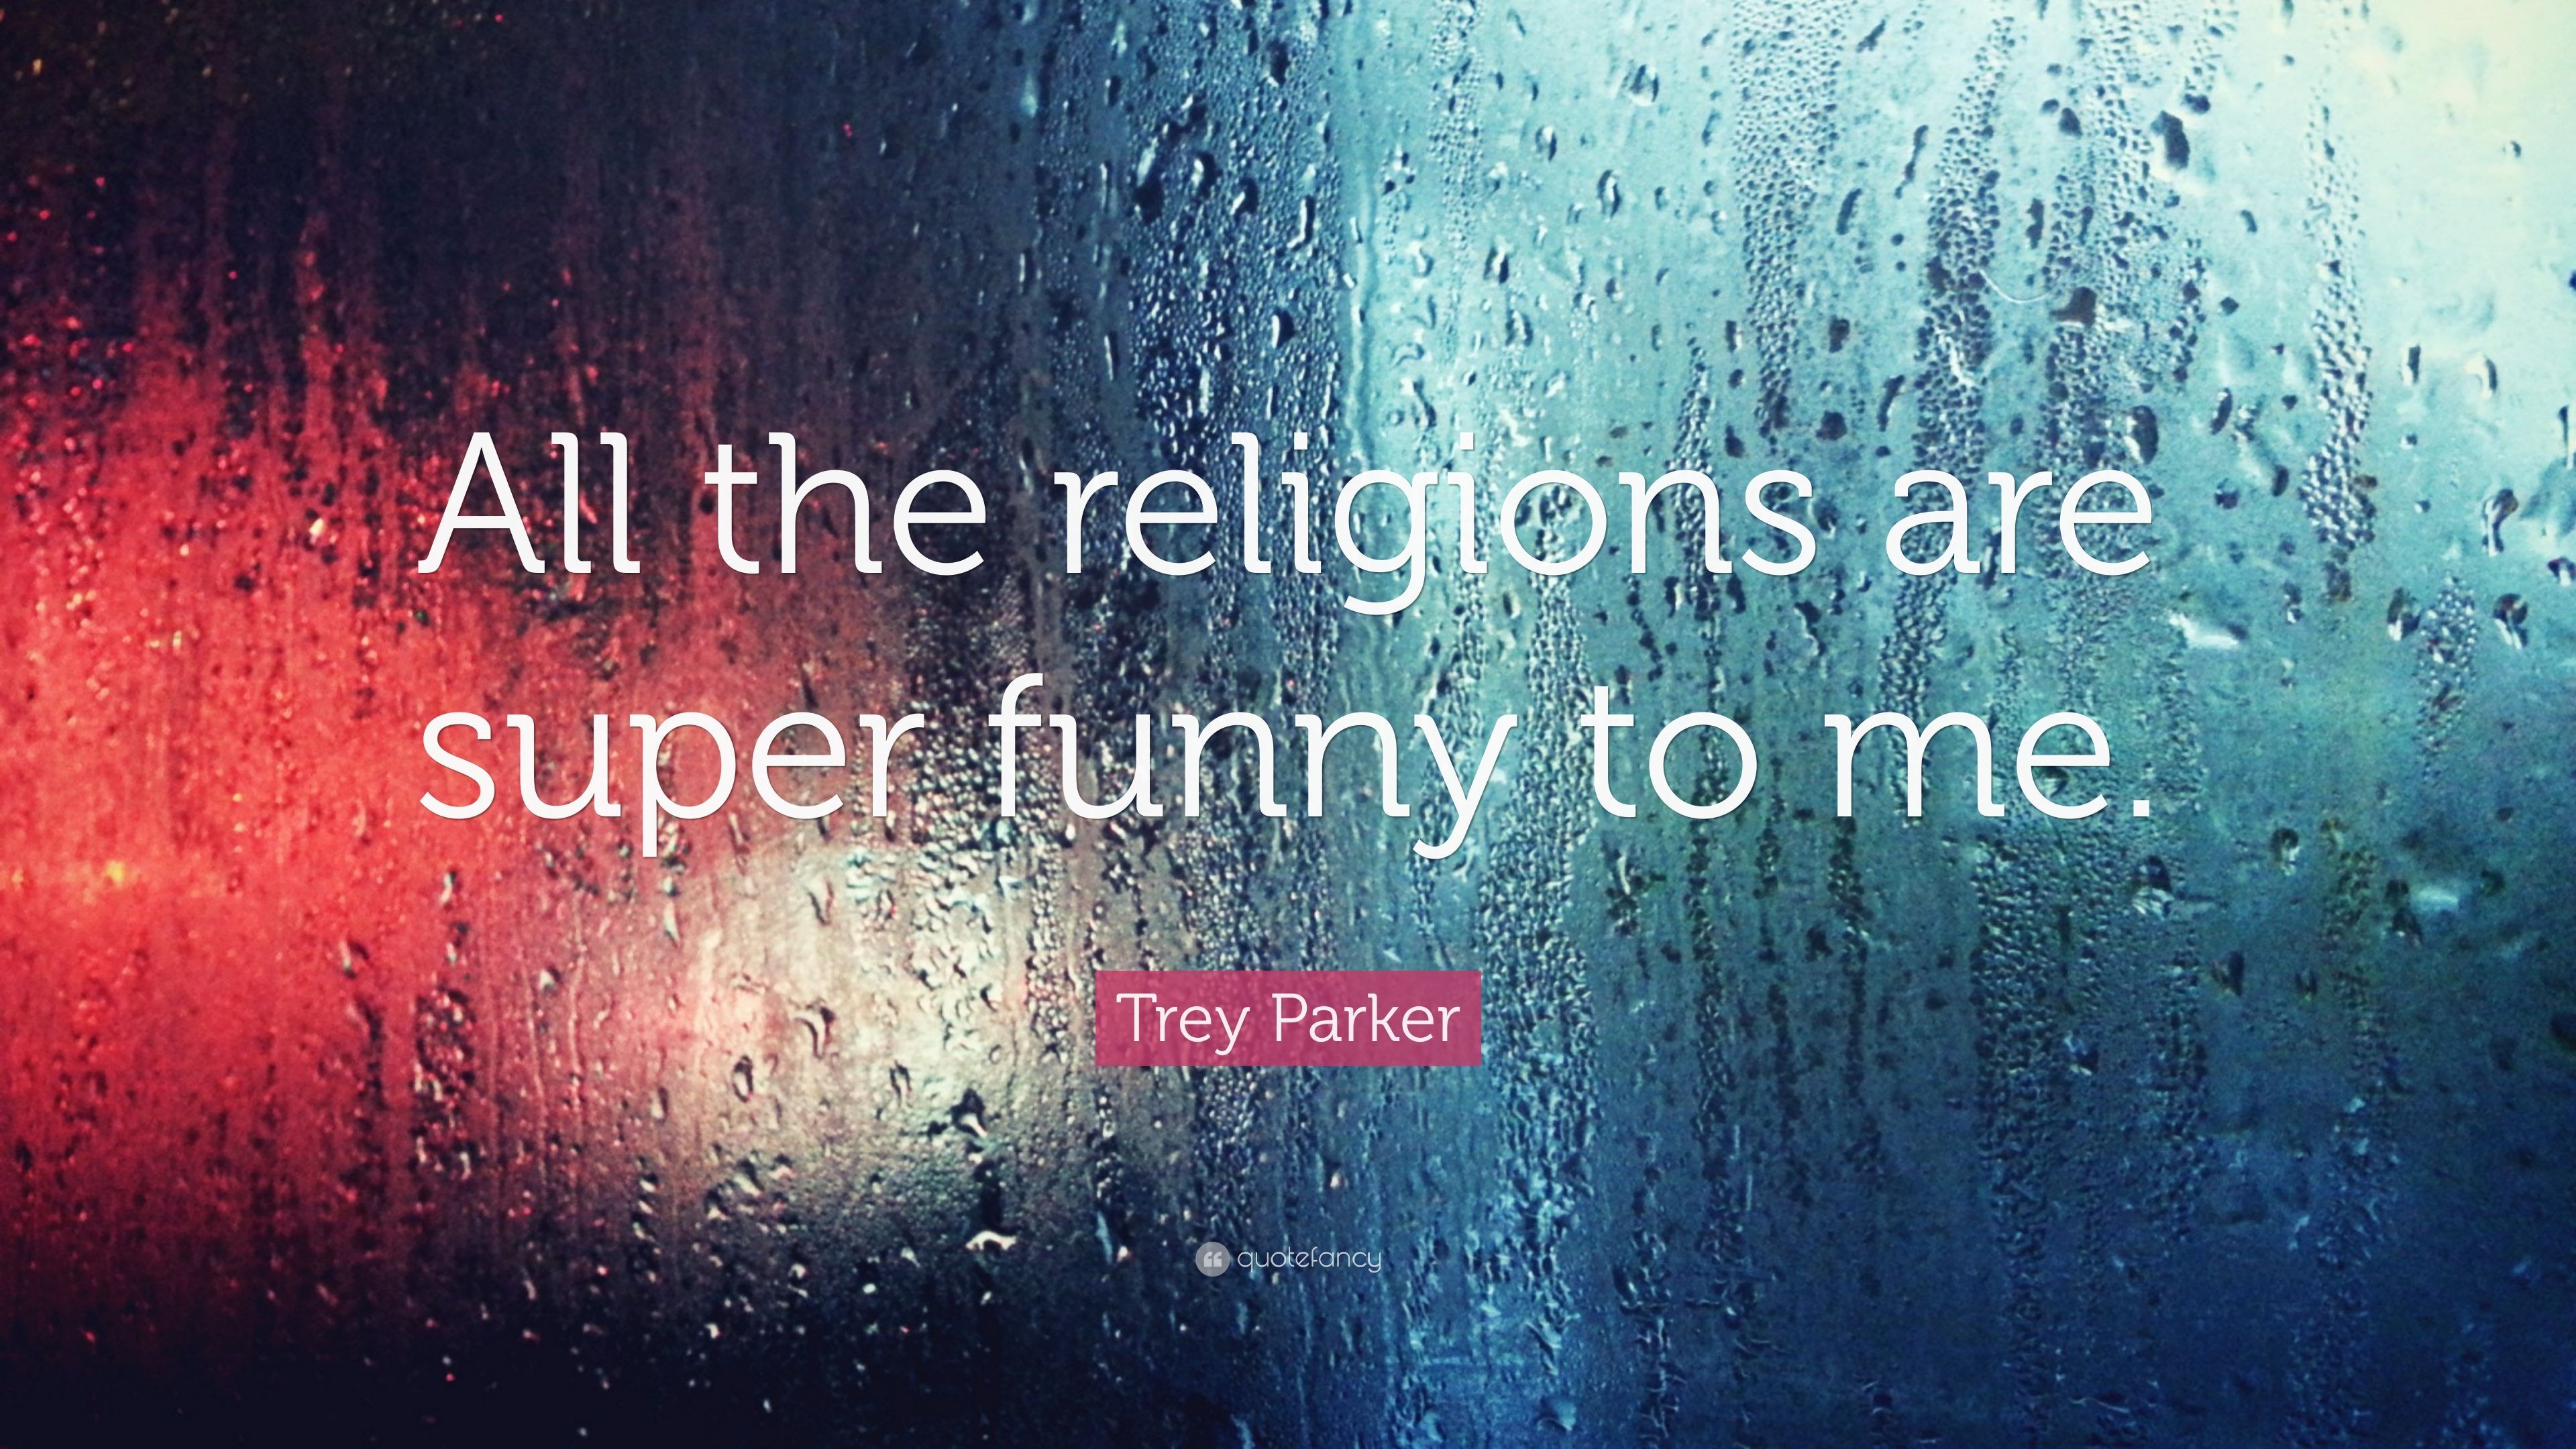 Trey Parker Quote: “All the religions are super funny to me.” (7 wallpaper)